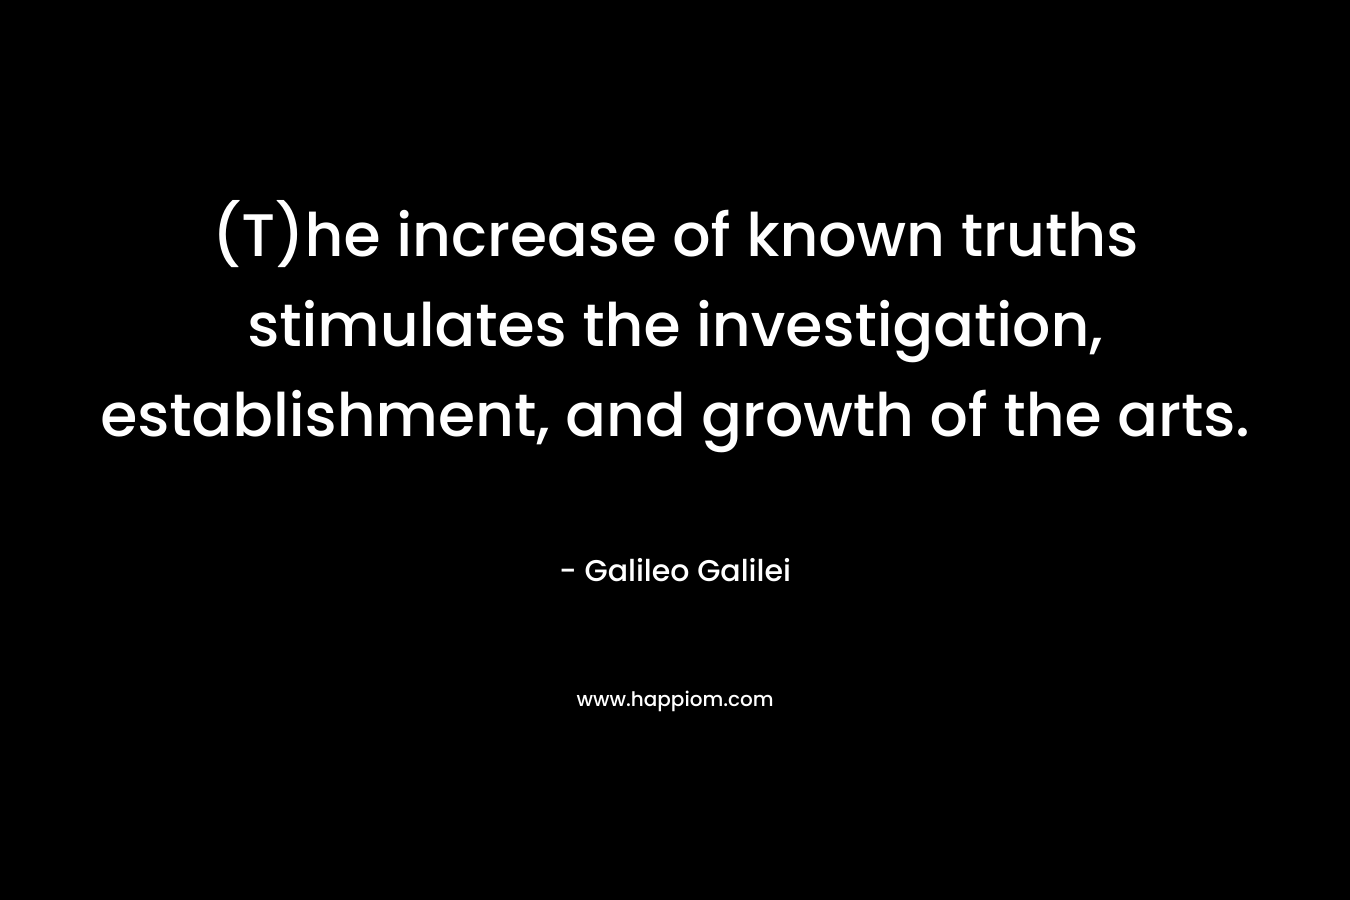 (T)he increase of known truths stimulates the investigation, establishment, and growth of the arts. – Galileo Galilei